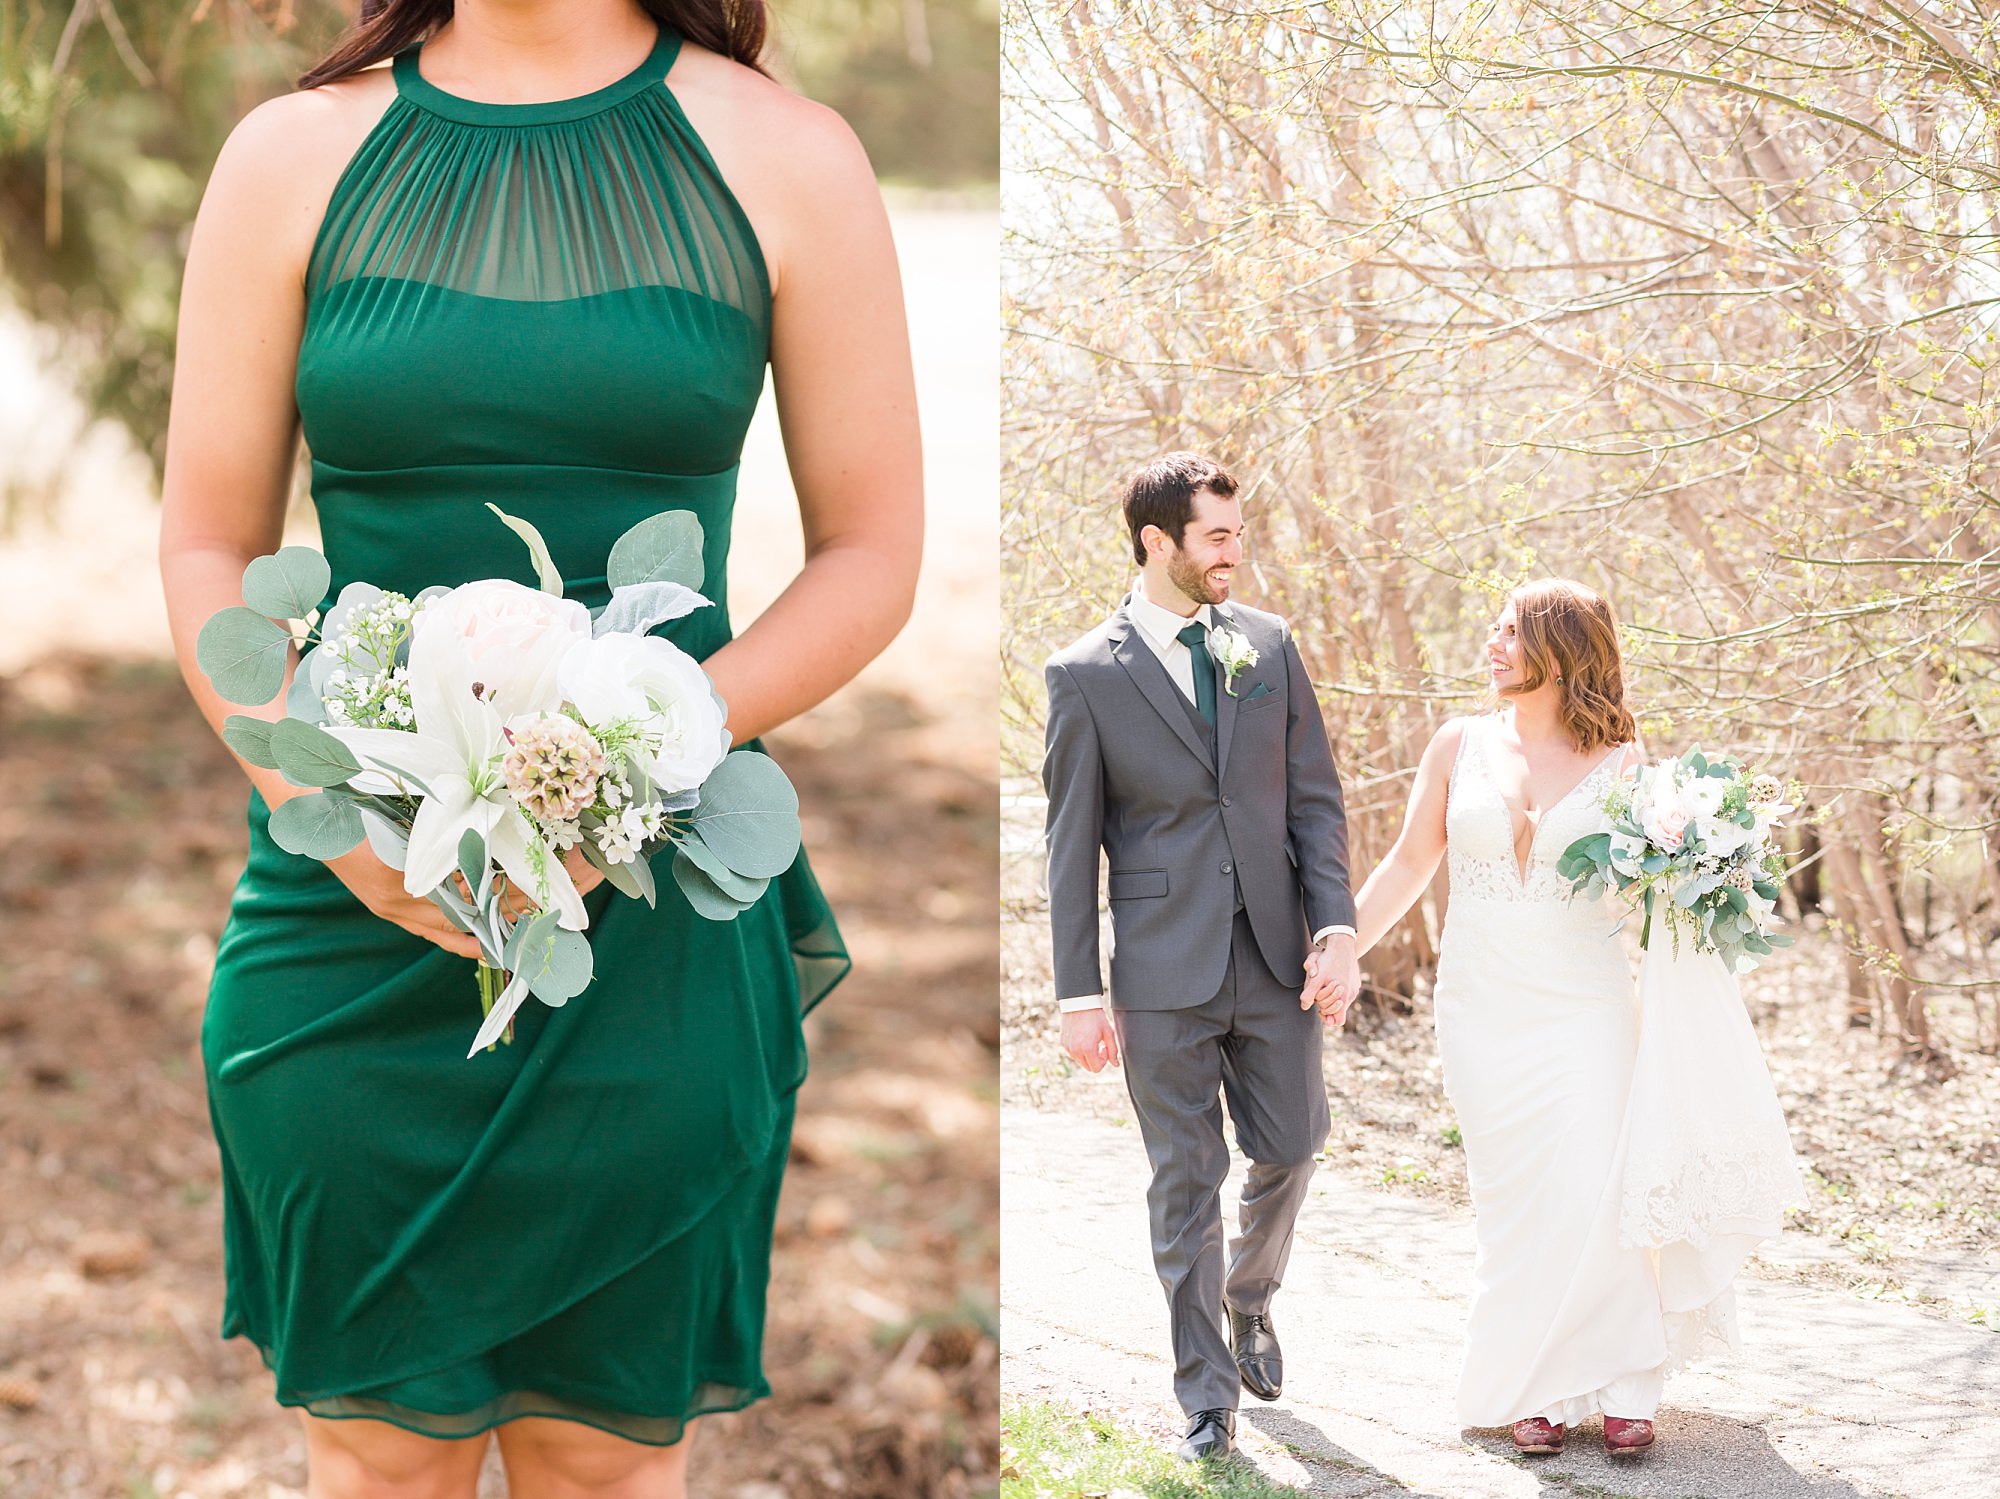 Emerald green halter top bridesmaid dresses with white flower bouquet